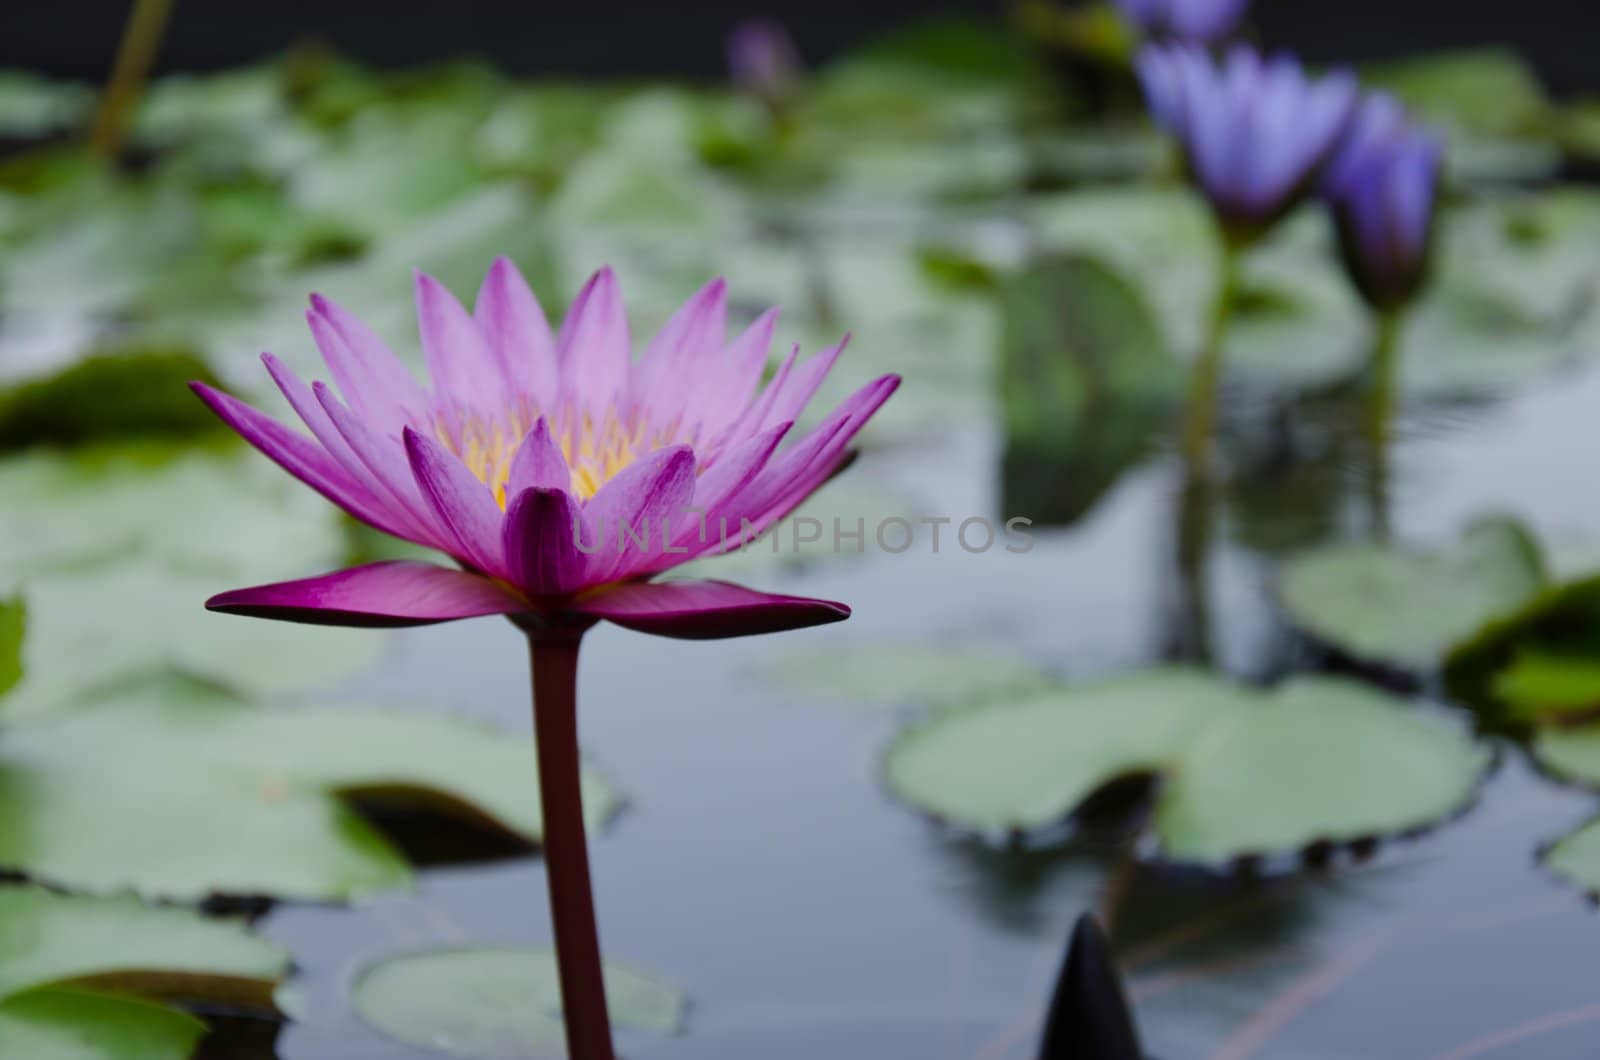 the beautiful colors in the lotus pond with lotus leaves.